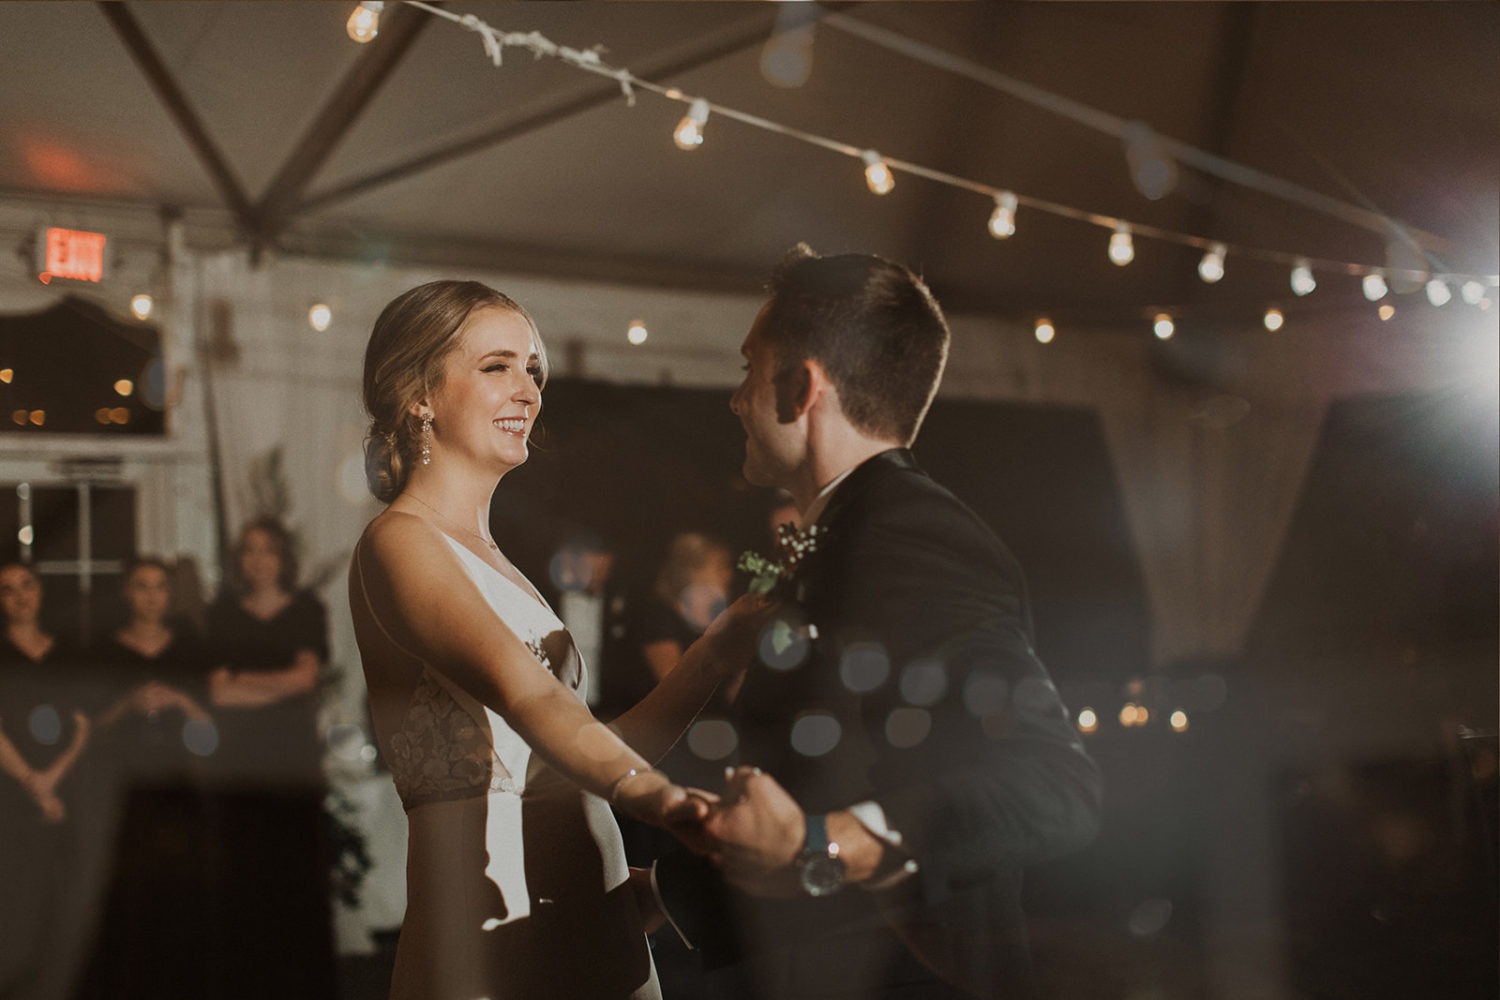 Couple dances at wedding reception captured by wedding videographer